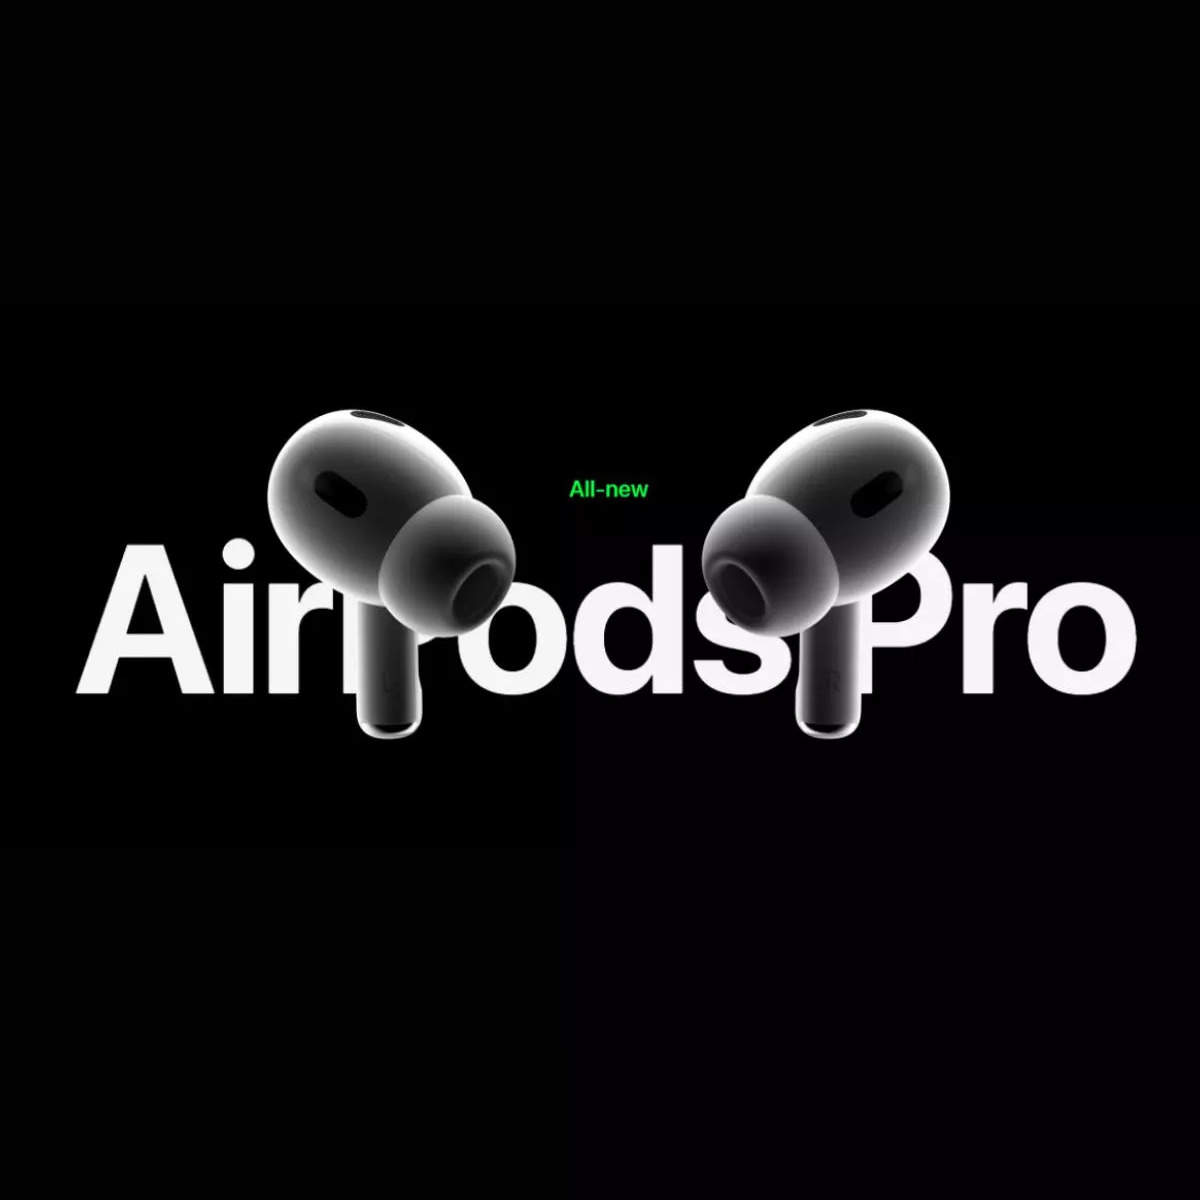 AirPods Pro (2nd generation) Ear Tips - 2 sets (Large) - Apple